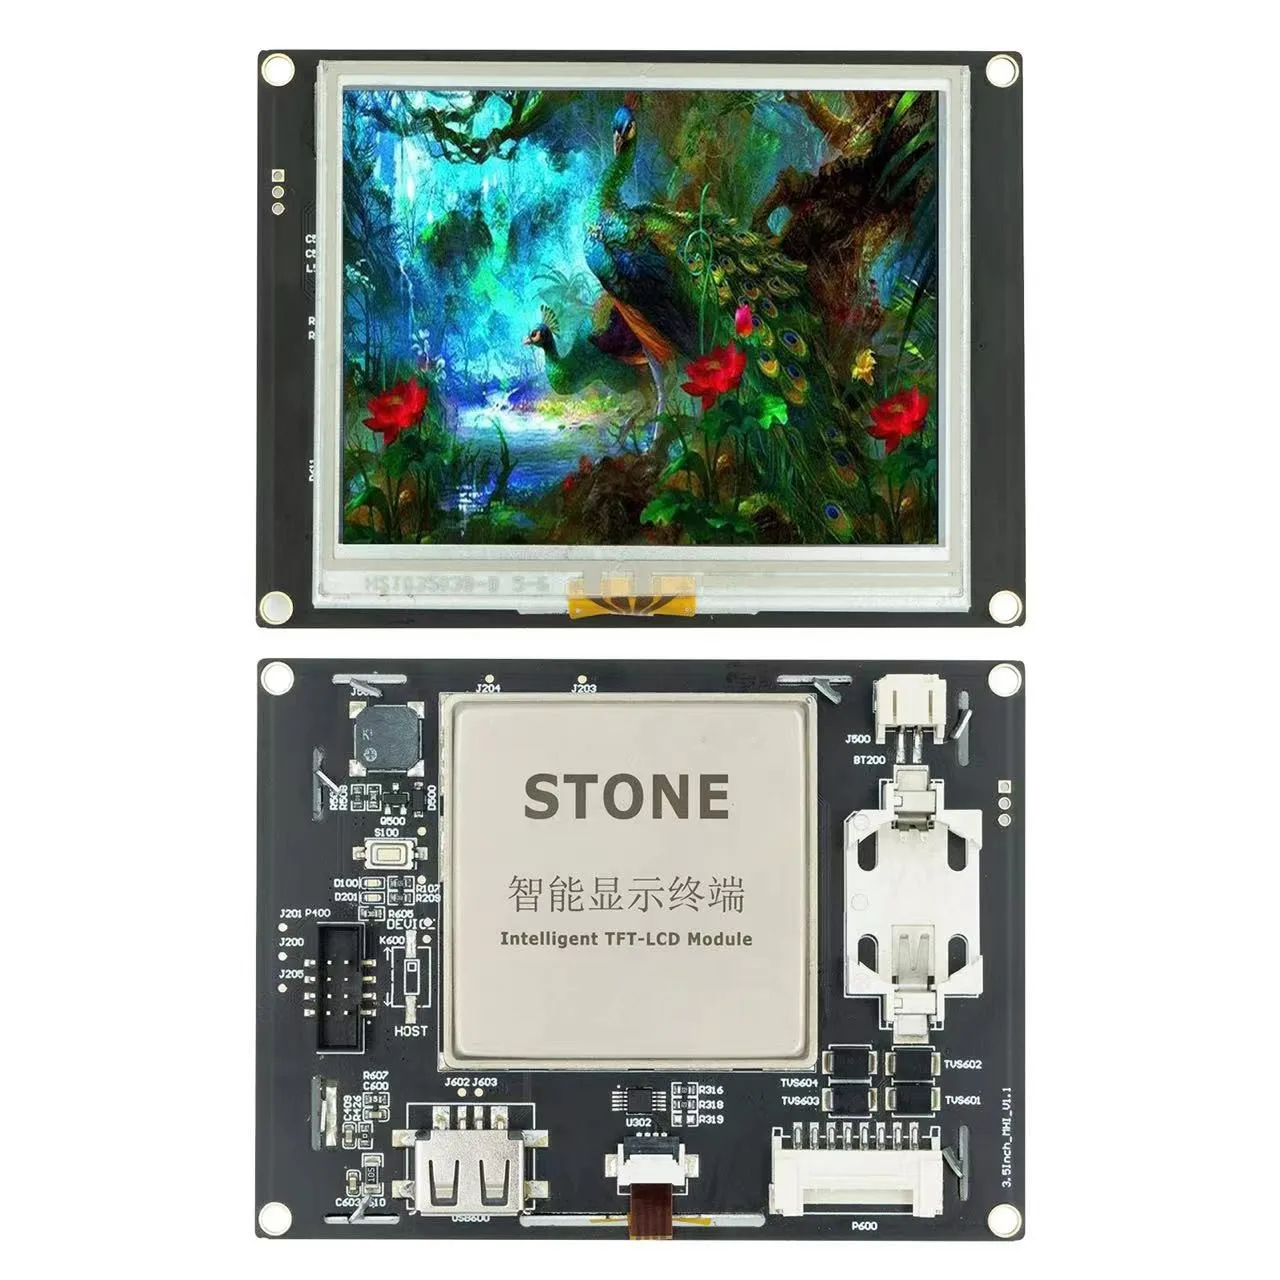 3.5 TFT Touch Display Includes processor, control program, driver, flash memory, RS232/RS422 / RS485/ TTL / LAN port, Wi-Fi / Bl